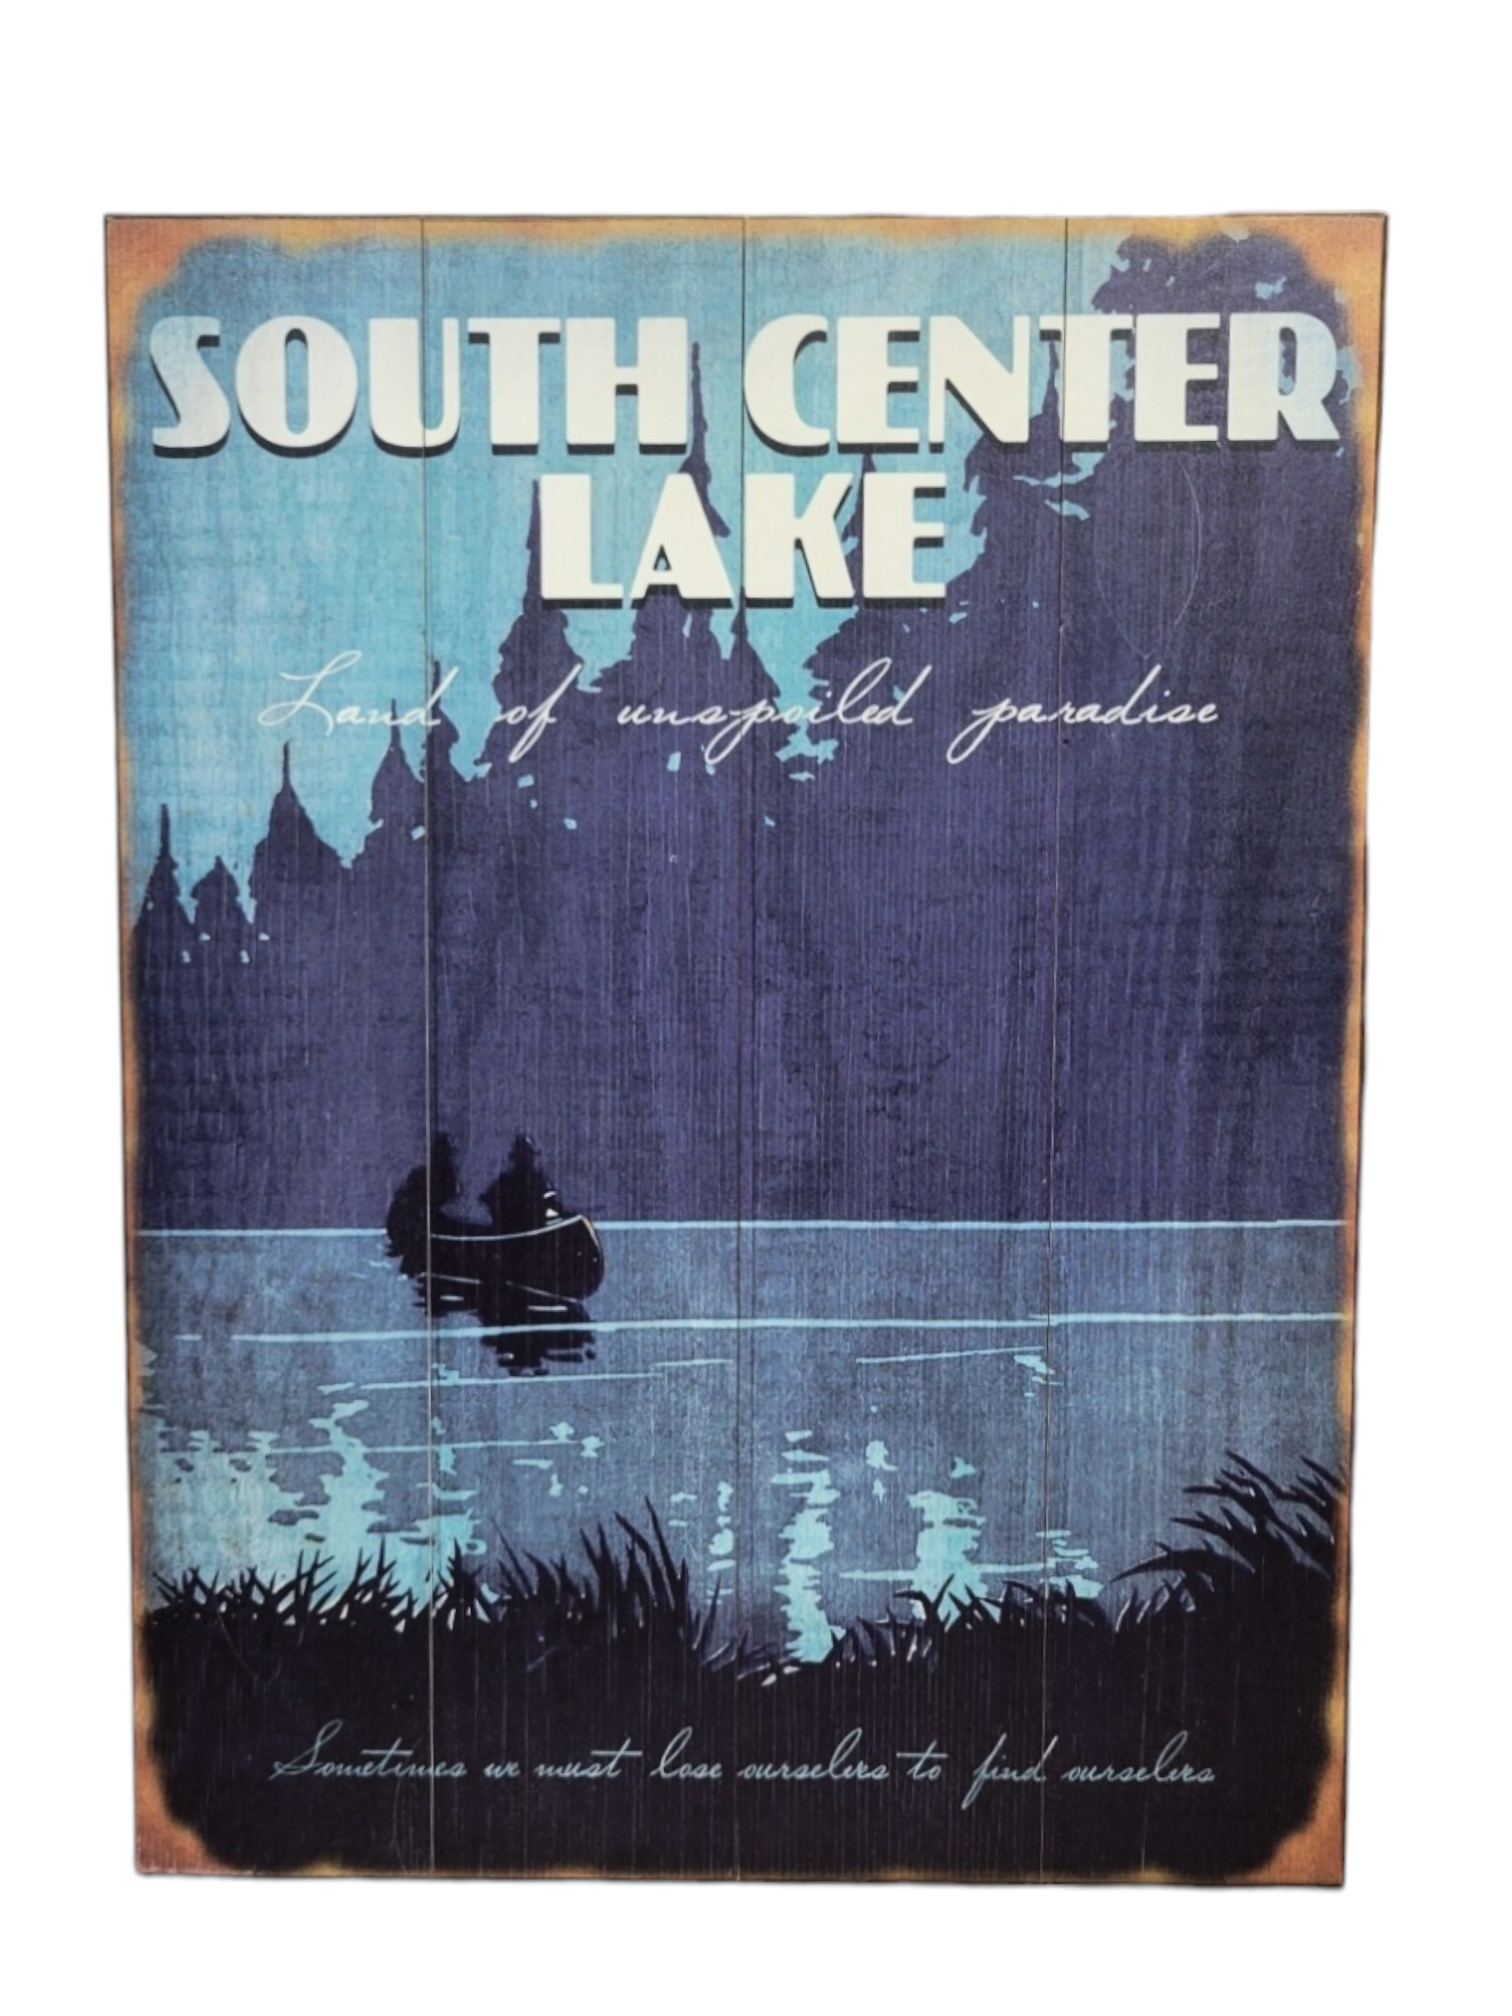 Sign: "Land of Unspoiled Paradise" - South Center Lake